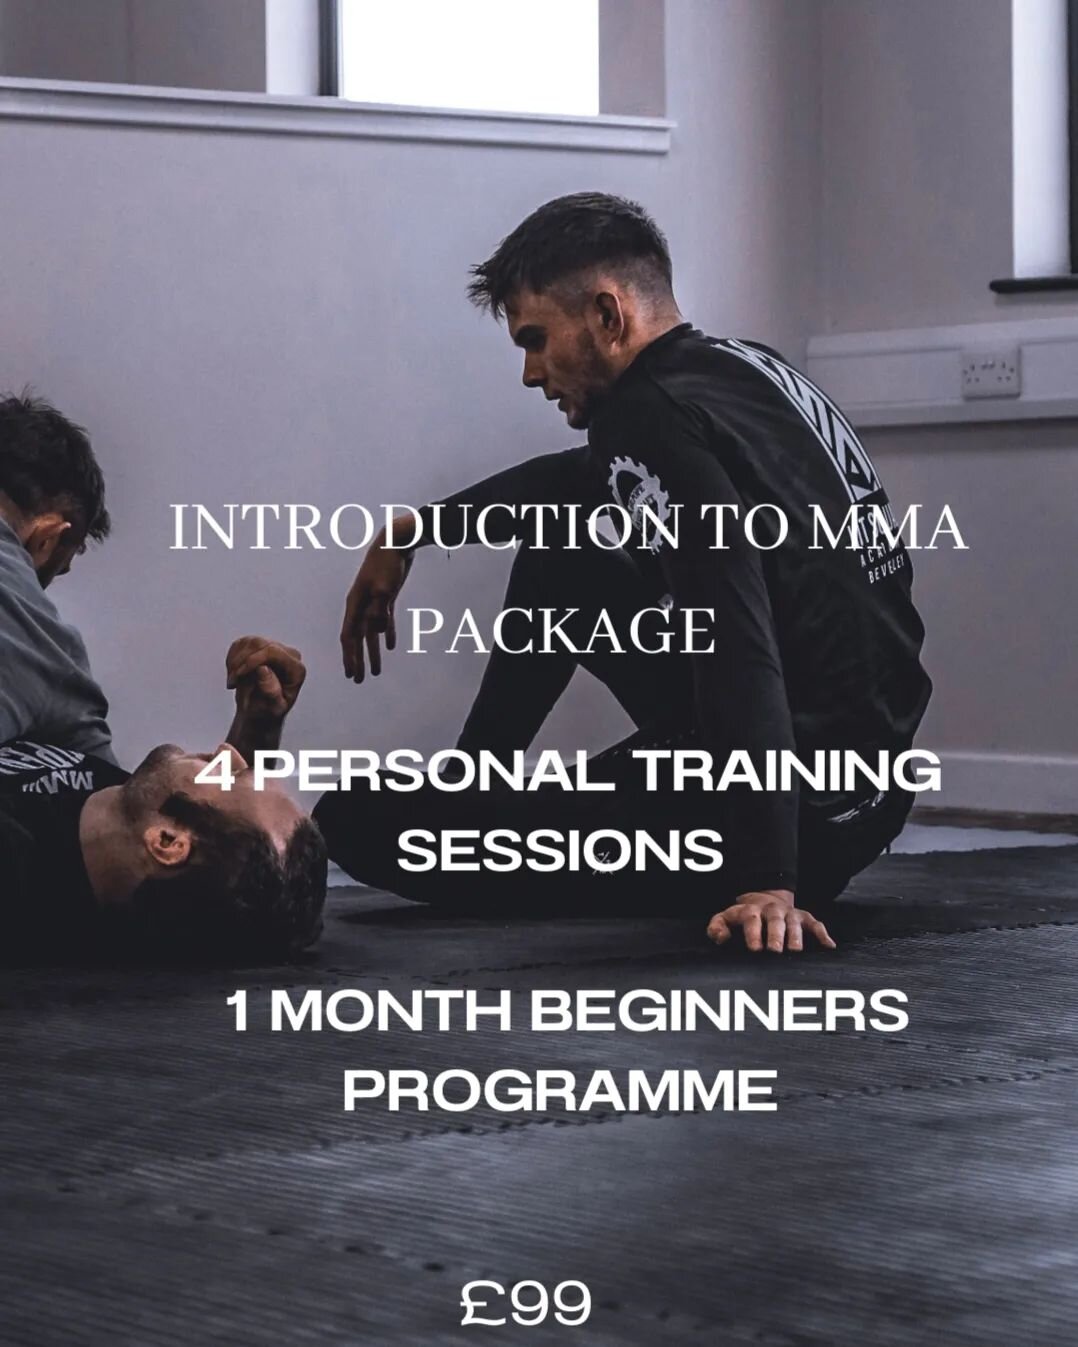 INTRODUCTION TO MARTIAL ARTS PACKAge

This month only

&pound;99 For for 4 personal training sessions and access to our beginners programmes.

This could be a perfect counterpart to our beginners MMA course for those looking for that personal touch t